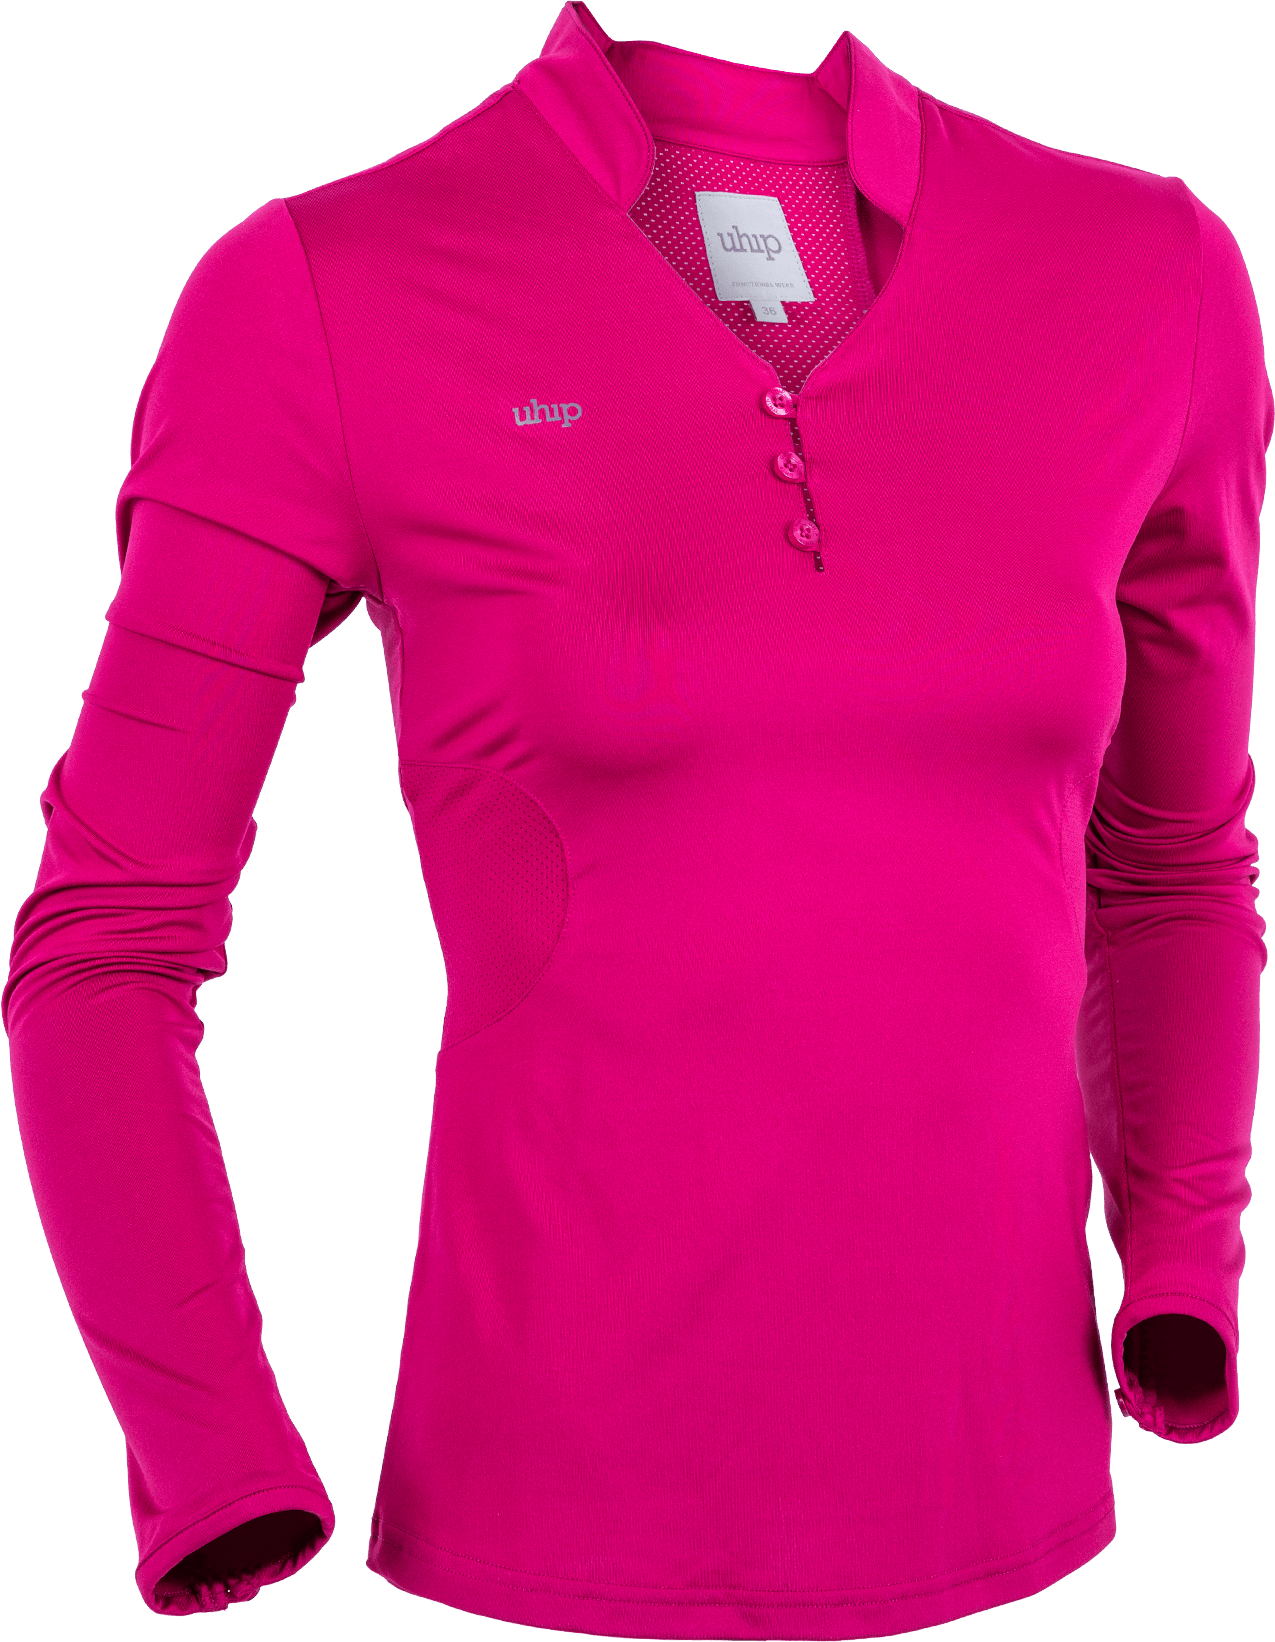 NEW 2021 Uhip Technical LONG Sleeve Top Cherrie Pink 